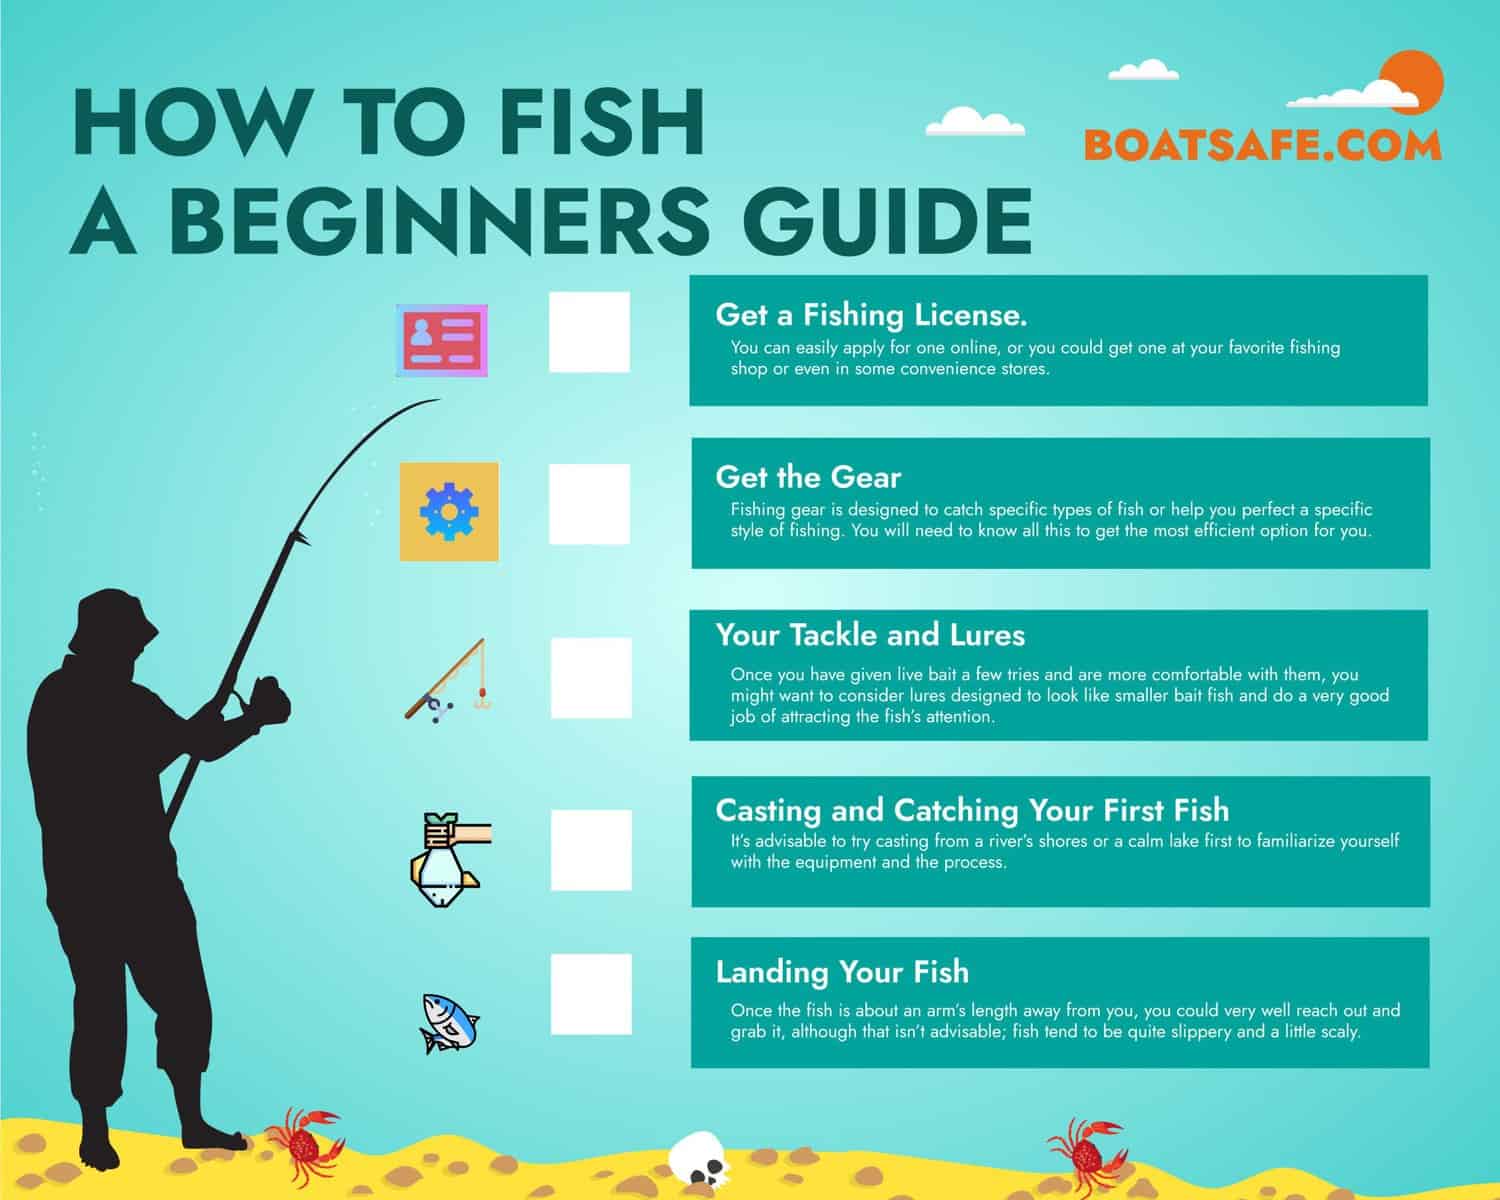 How to Set up a Fishing Rod 101: Easy Guide on Setting Up a Fishing Rod